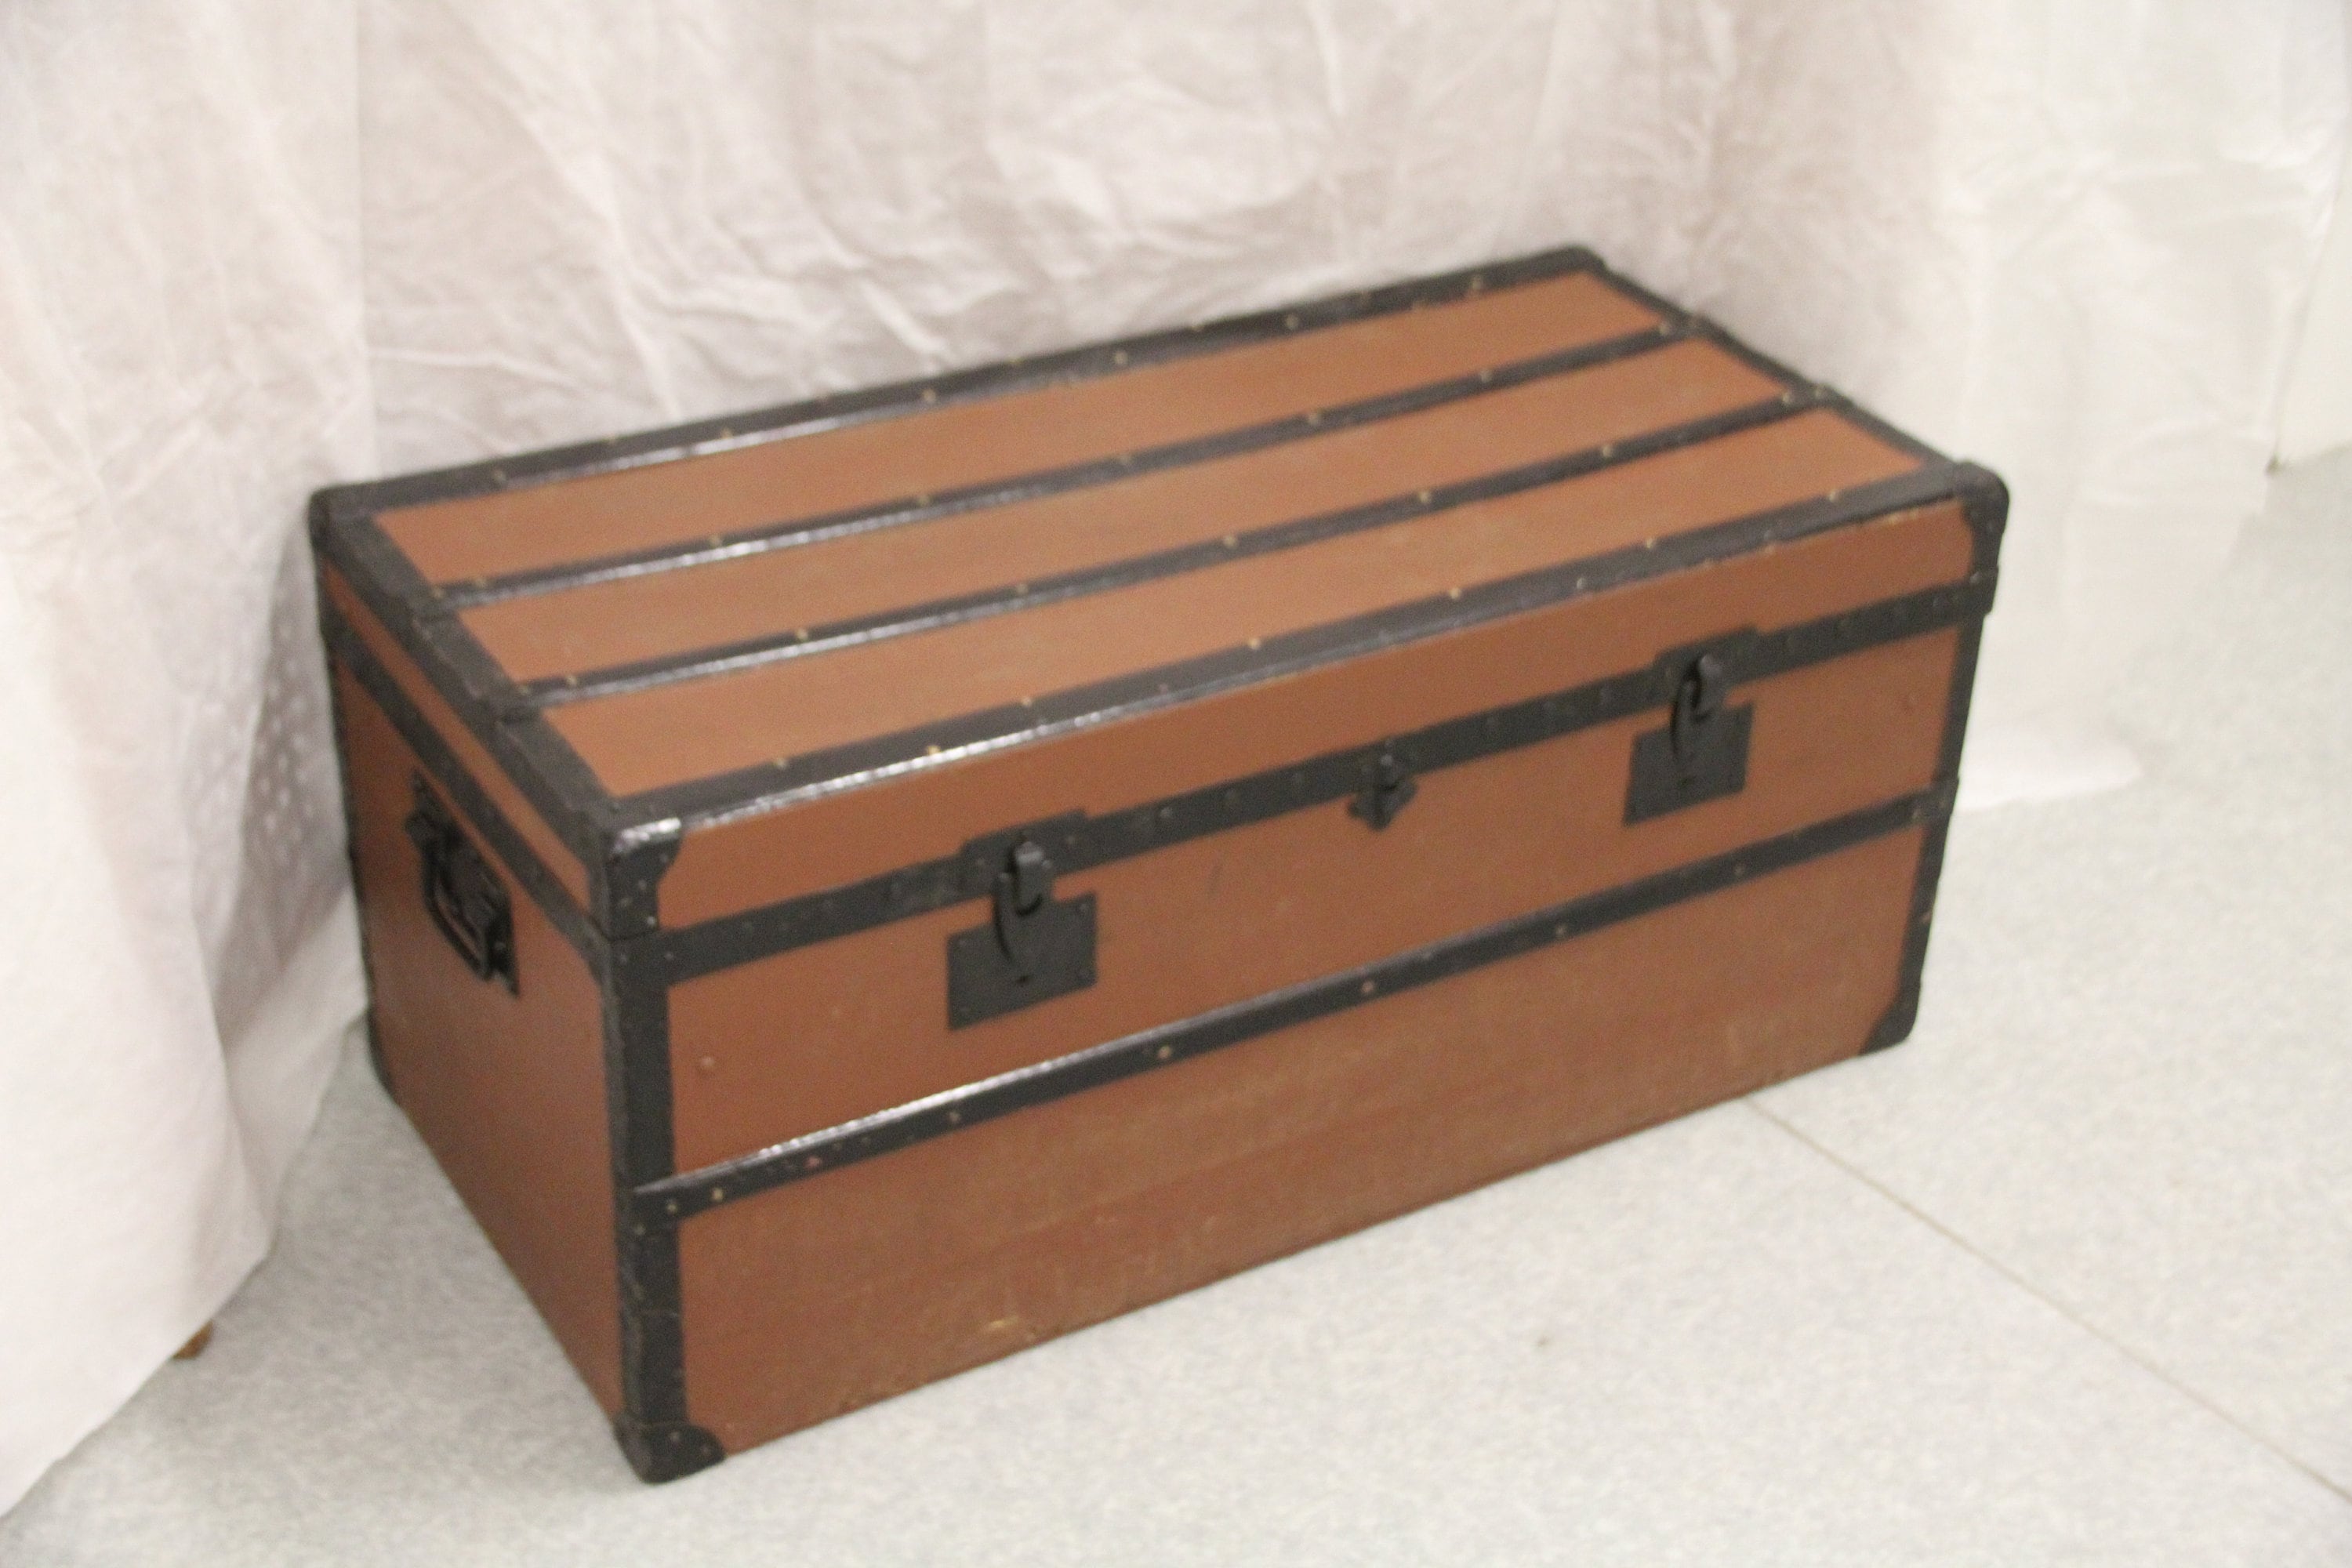 Antique Louis Vuitton coffee table trunk - large size - Pinth